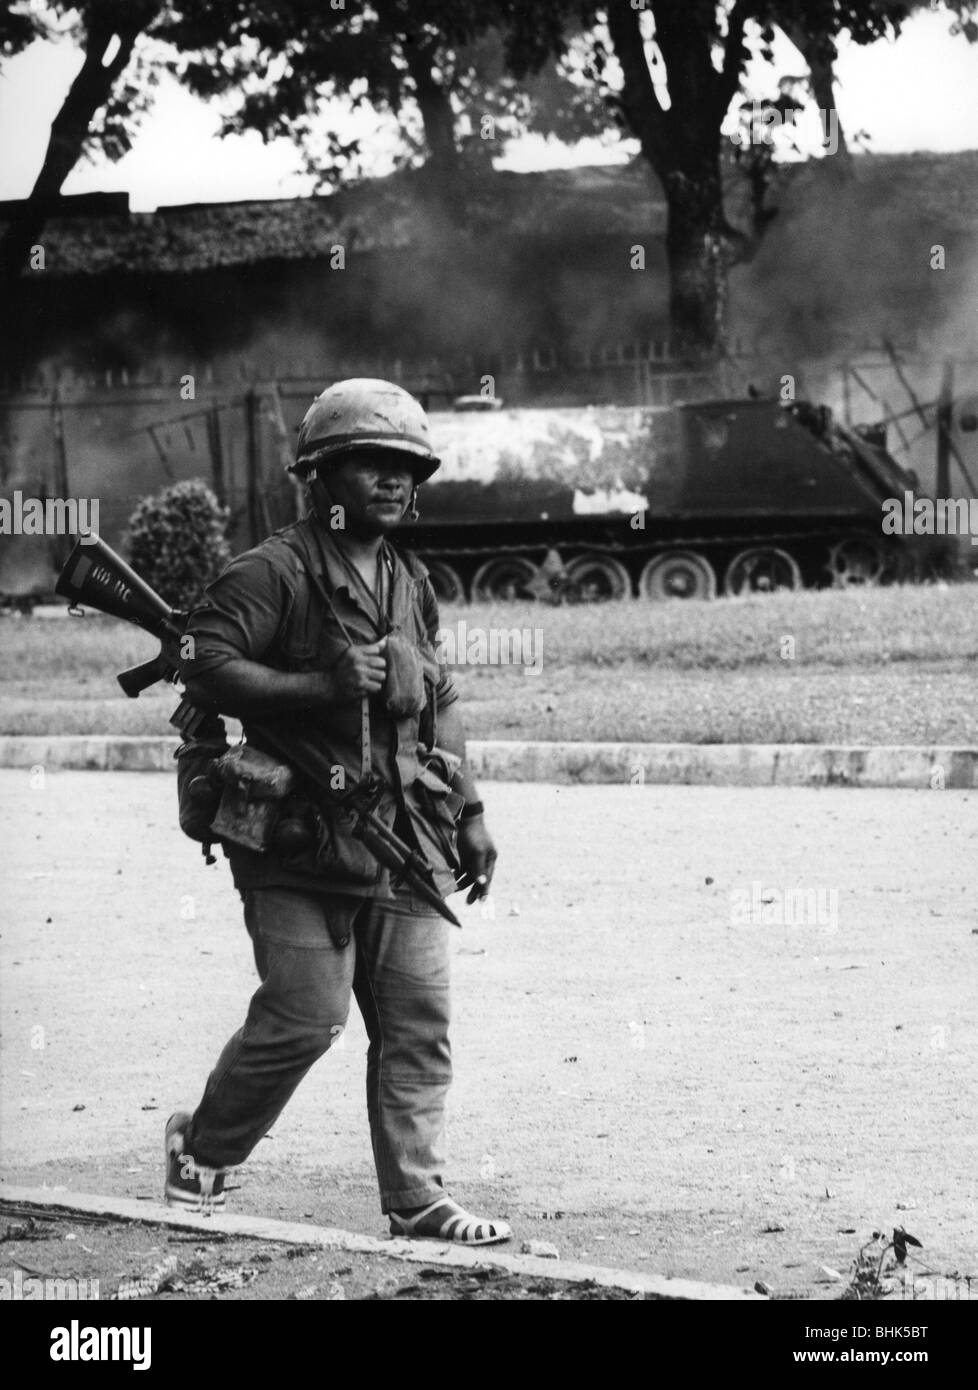 events, Vietnam War, Cambodian soldier in front of a burning military vehicle at Phnom Penh, Cambodia, after a Viet Cong attack, 7.10.1972, South-East Asia, Southeast Asia, Second Indochina War, 20th century, historic, historical, 1970s, 70s, US M113 armored personnel carrier, M 113, M-113, destroyed, wreck, weapon, arm, assault rifle, bayonet, uniform, uniforms, steel helmet, people, Stock Photo